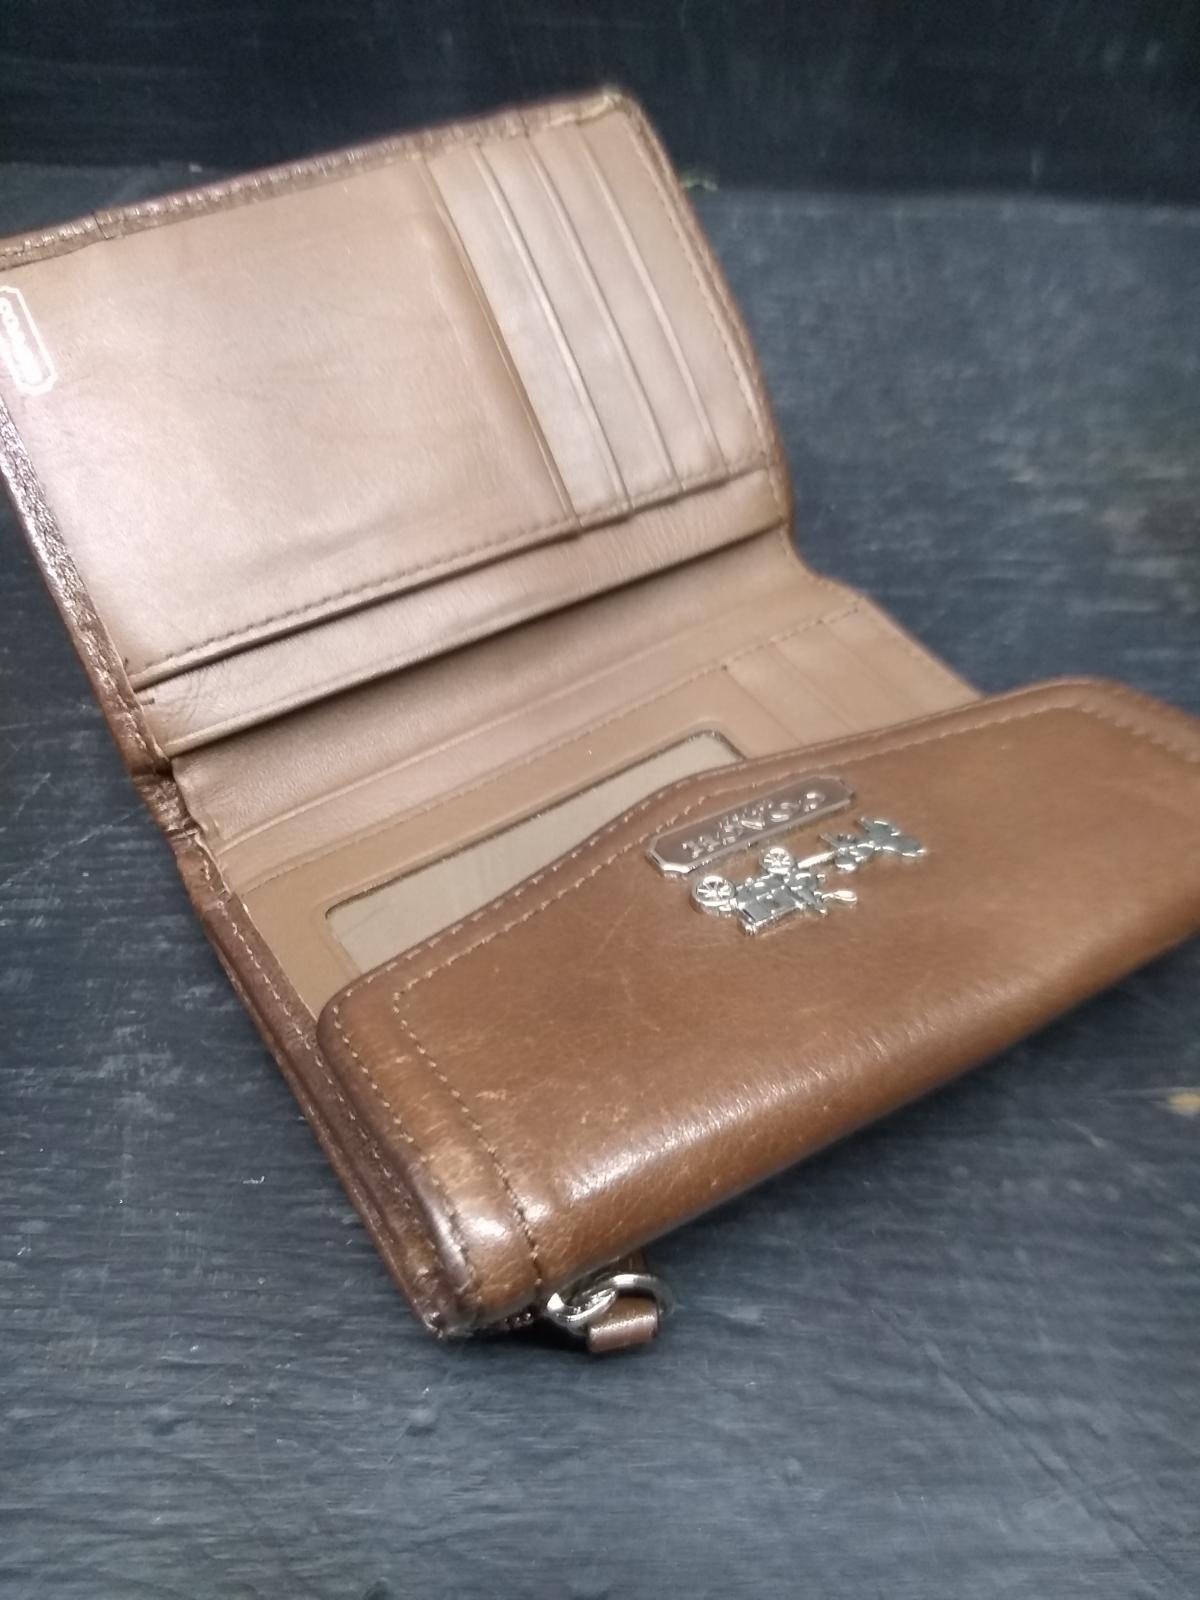 Unauthenticated Coach Change Purse